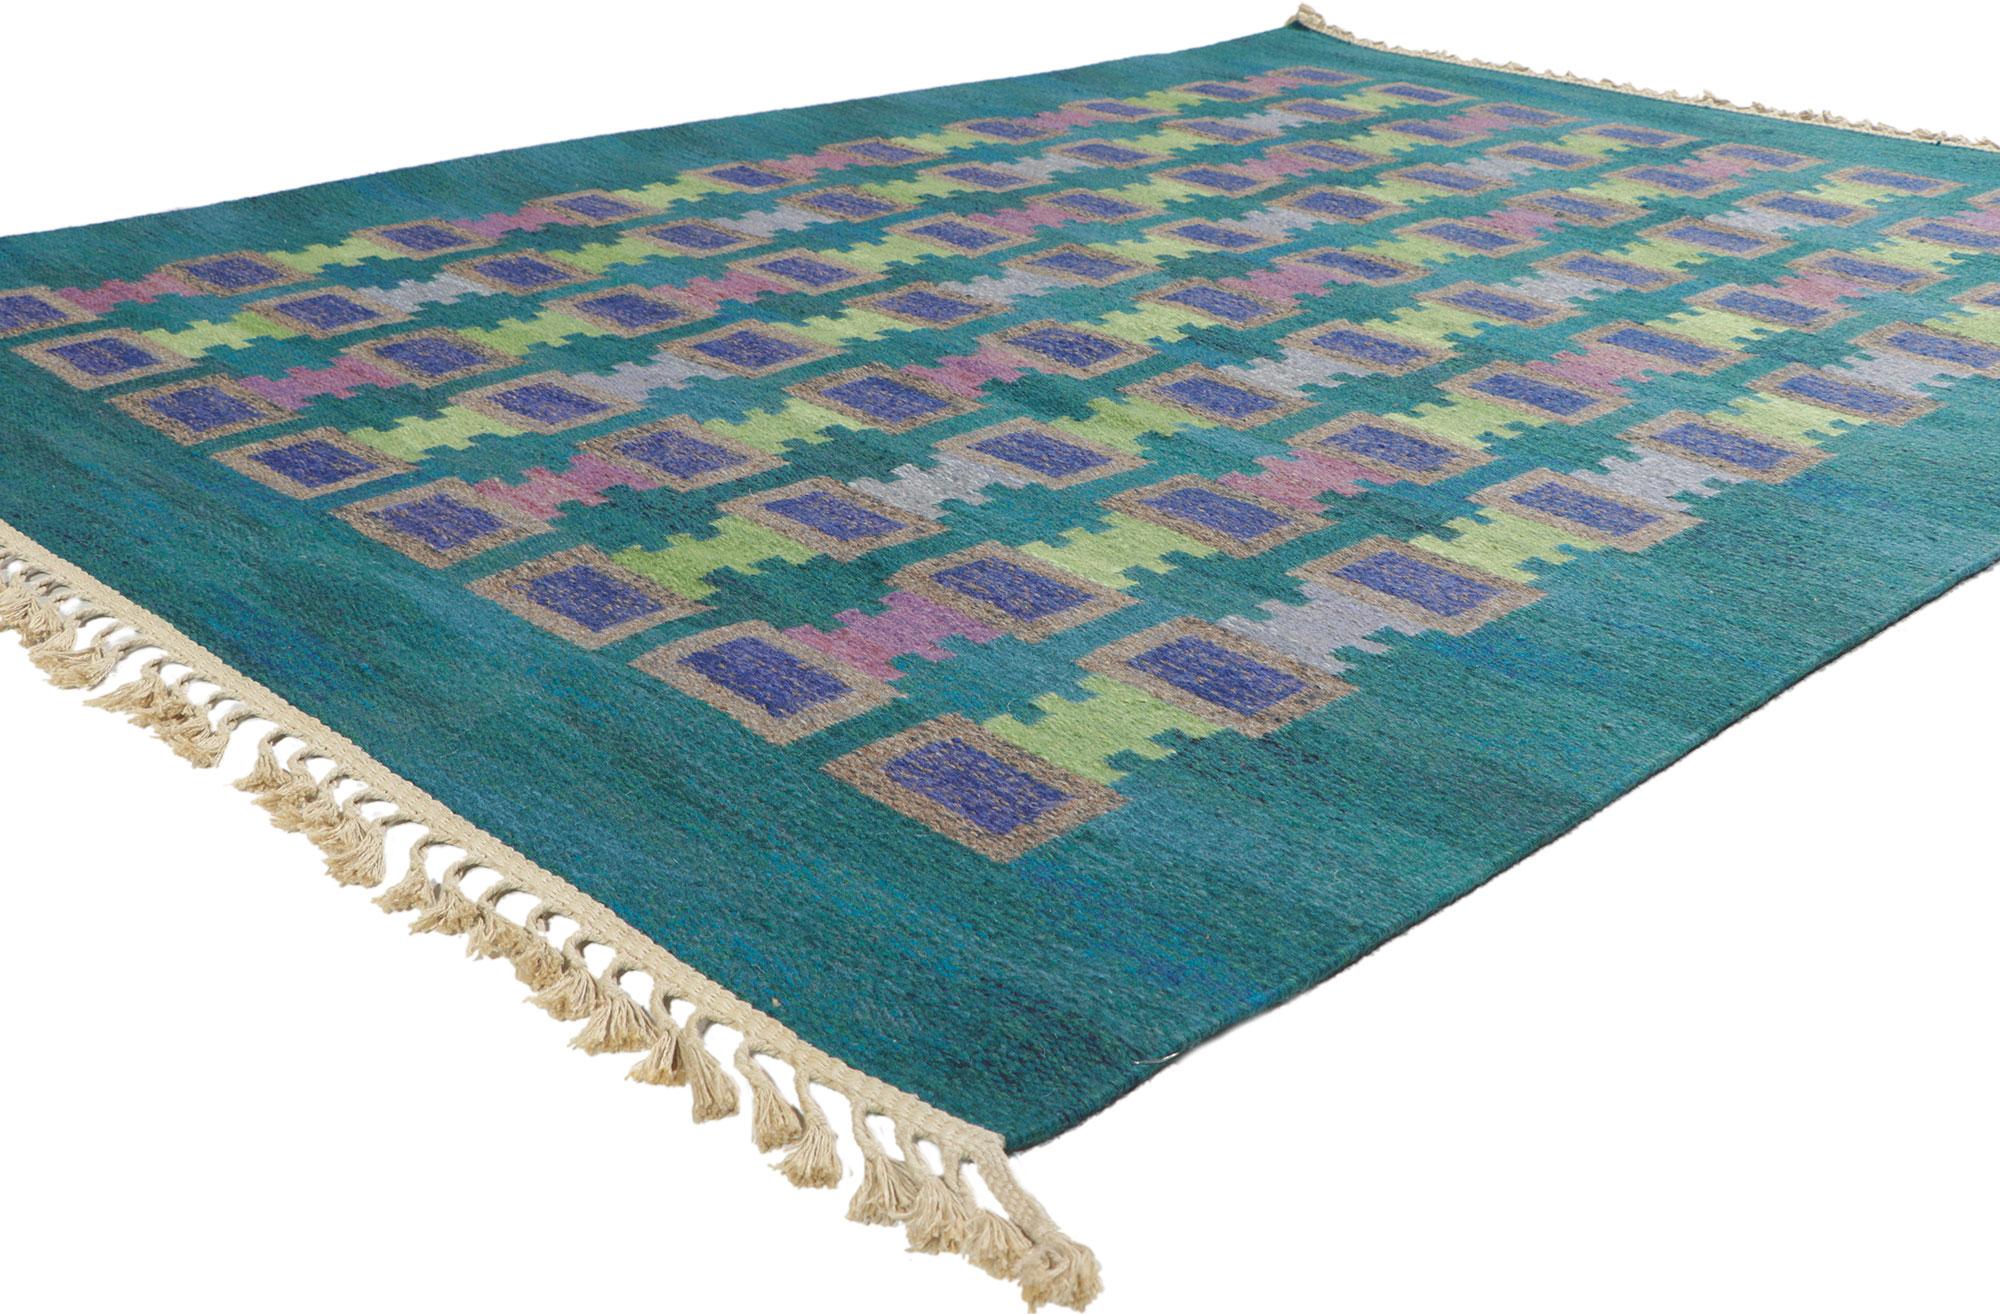 78495 Vintage Swedish Rollakan Rug by Judith Johansson, 05'07 x 07'11.
With its Scandinavian Modern style, incredible detail and texture, this handwoven wool vintage Swedish rollakan rug is a captivating vision of woven beauty. The eye-catching